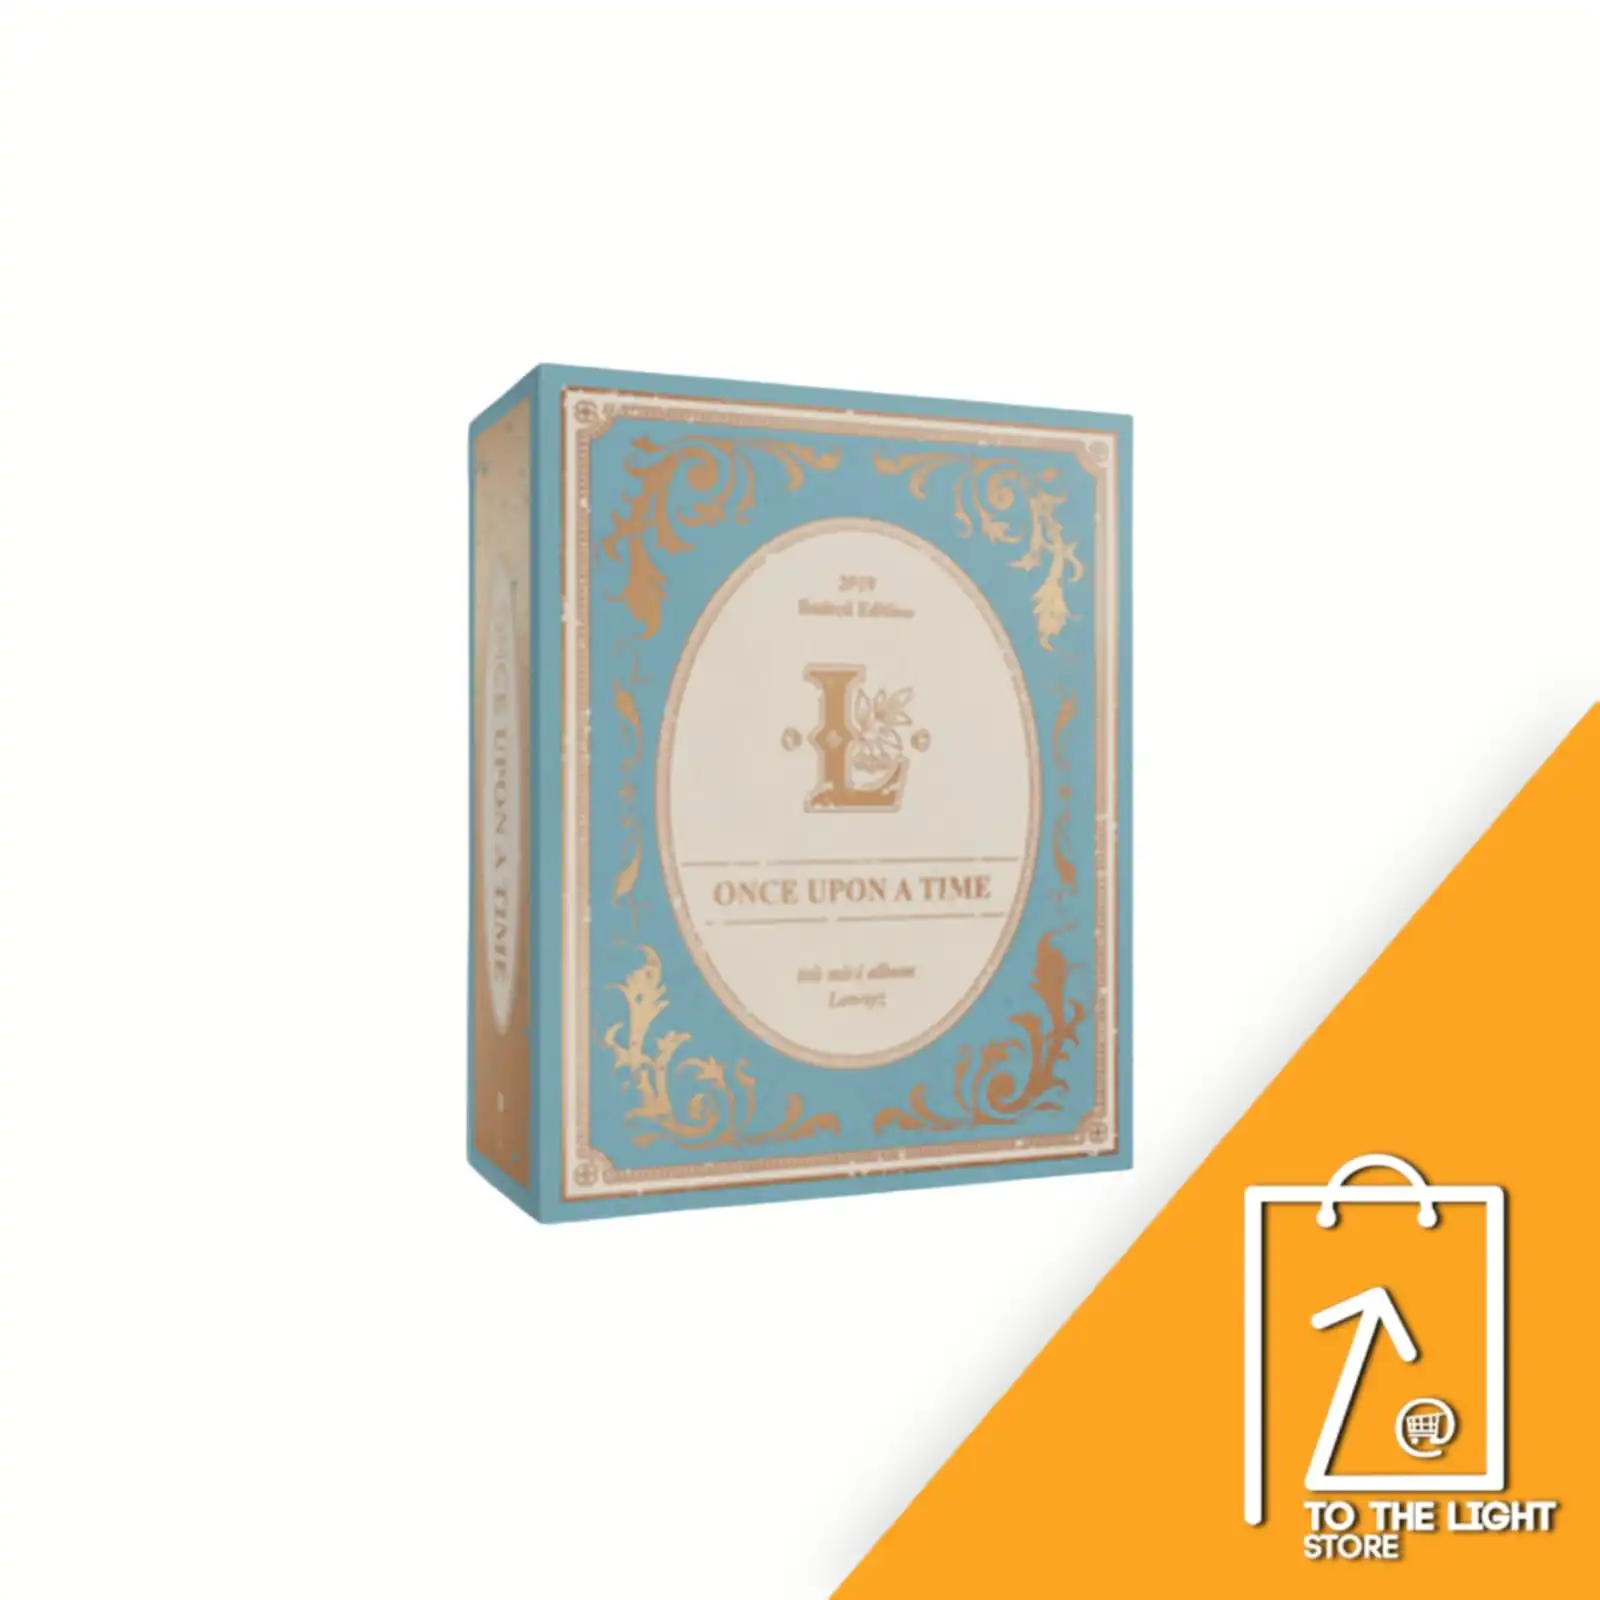 Lovelyz 6th Mini Album – ONCE UPON A TIME (Limited Ver.)